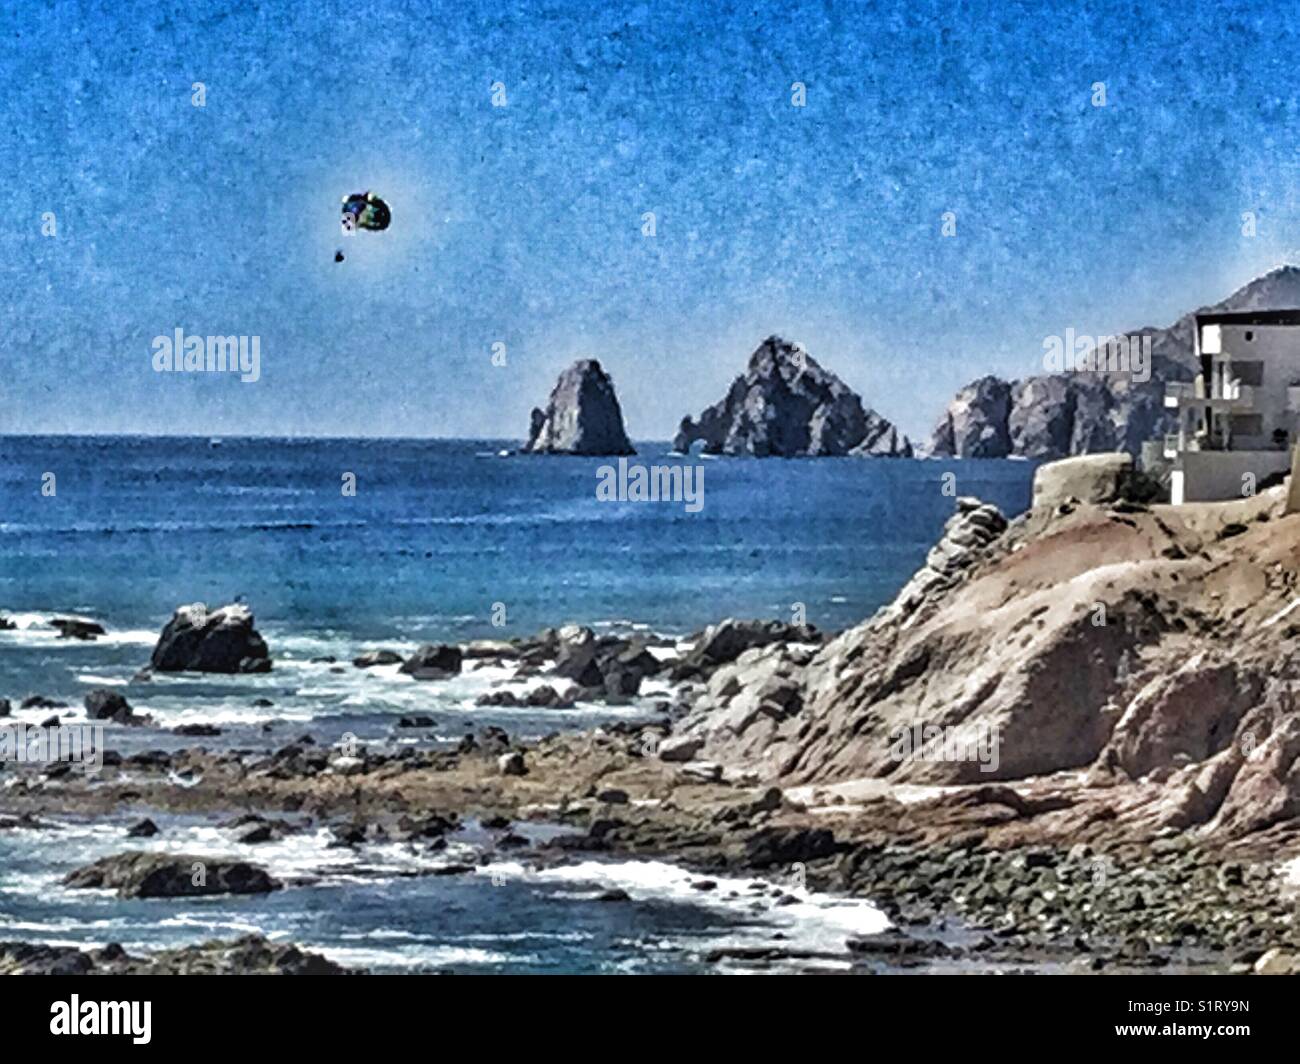 A view of The Arch in Cabo San Lucas, Mexico. Stock Photo